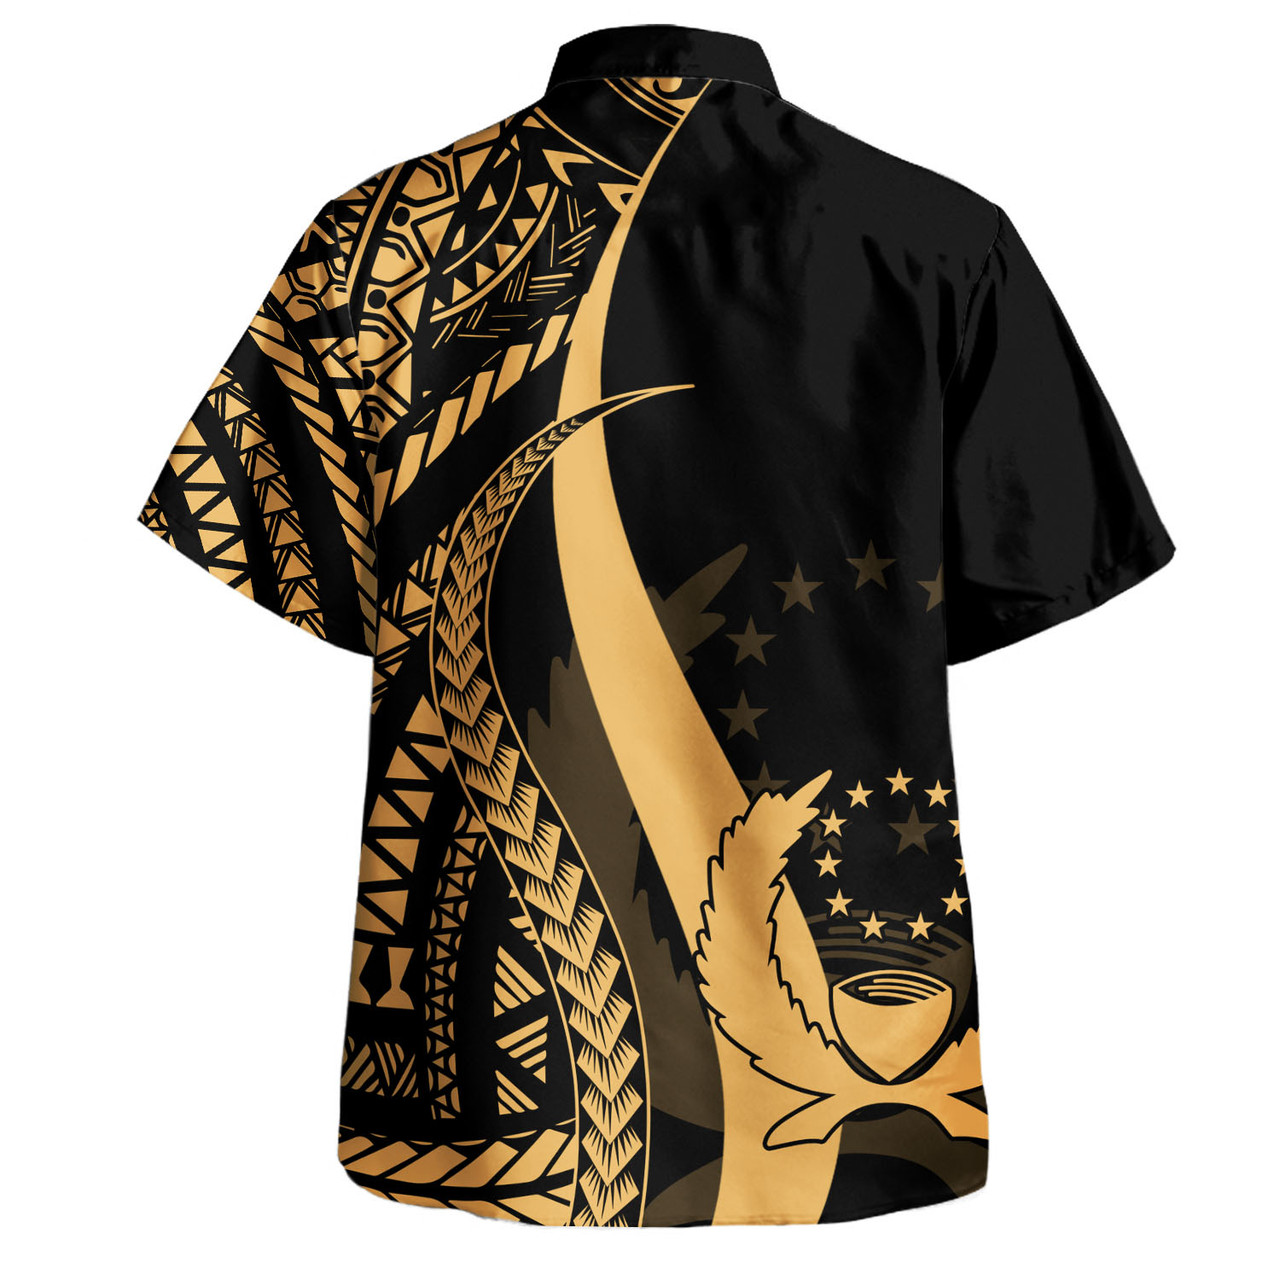 Pohnpei Combo Dress And Shirt - Micronesian Tentacle Tribal Pattern Gold